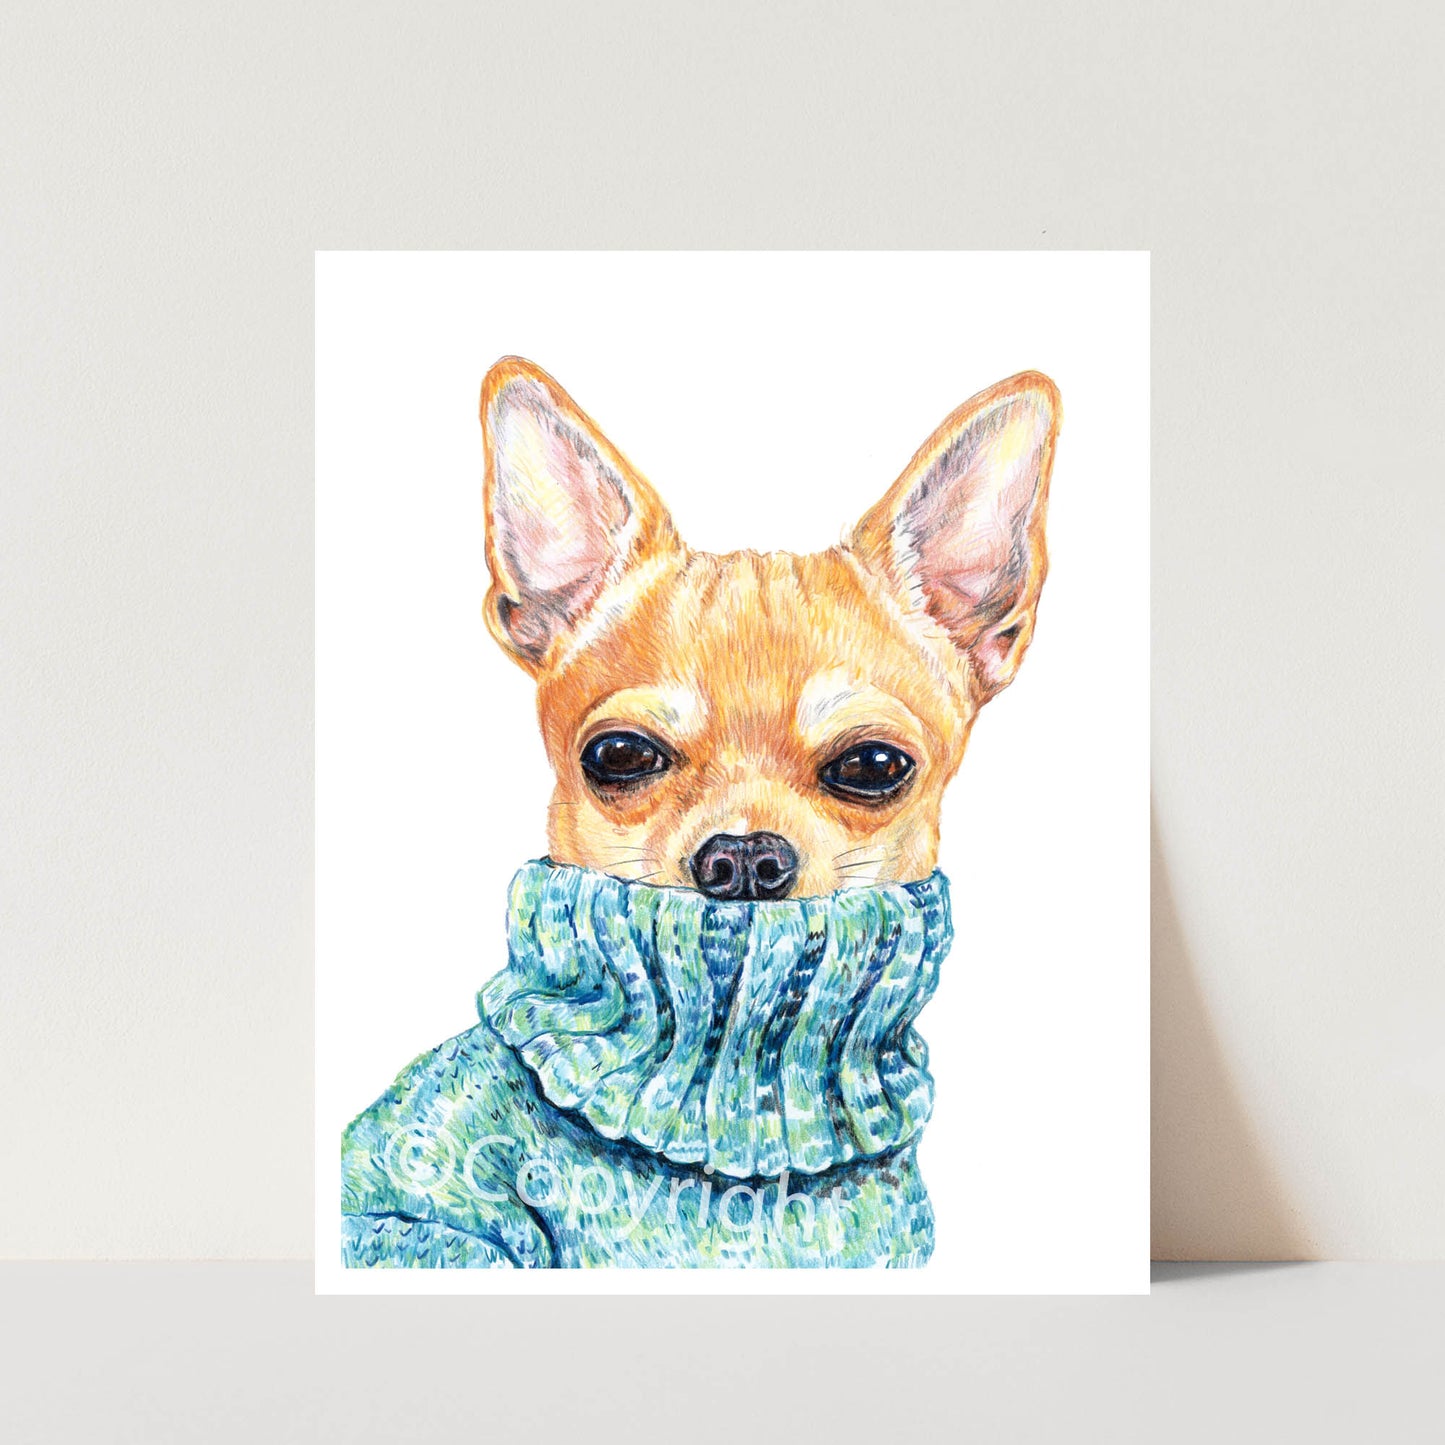 Crayon drawing of a tough chihuahua dog wearing a blue turtleneck sweater by Deidre Wicks